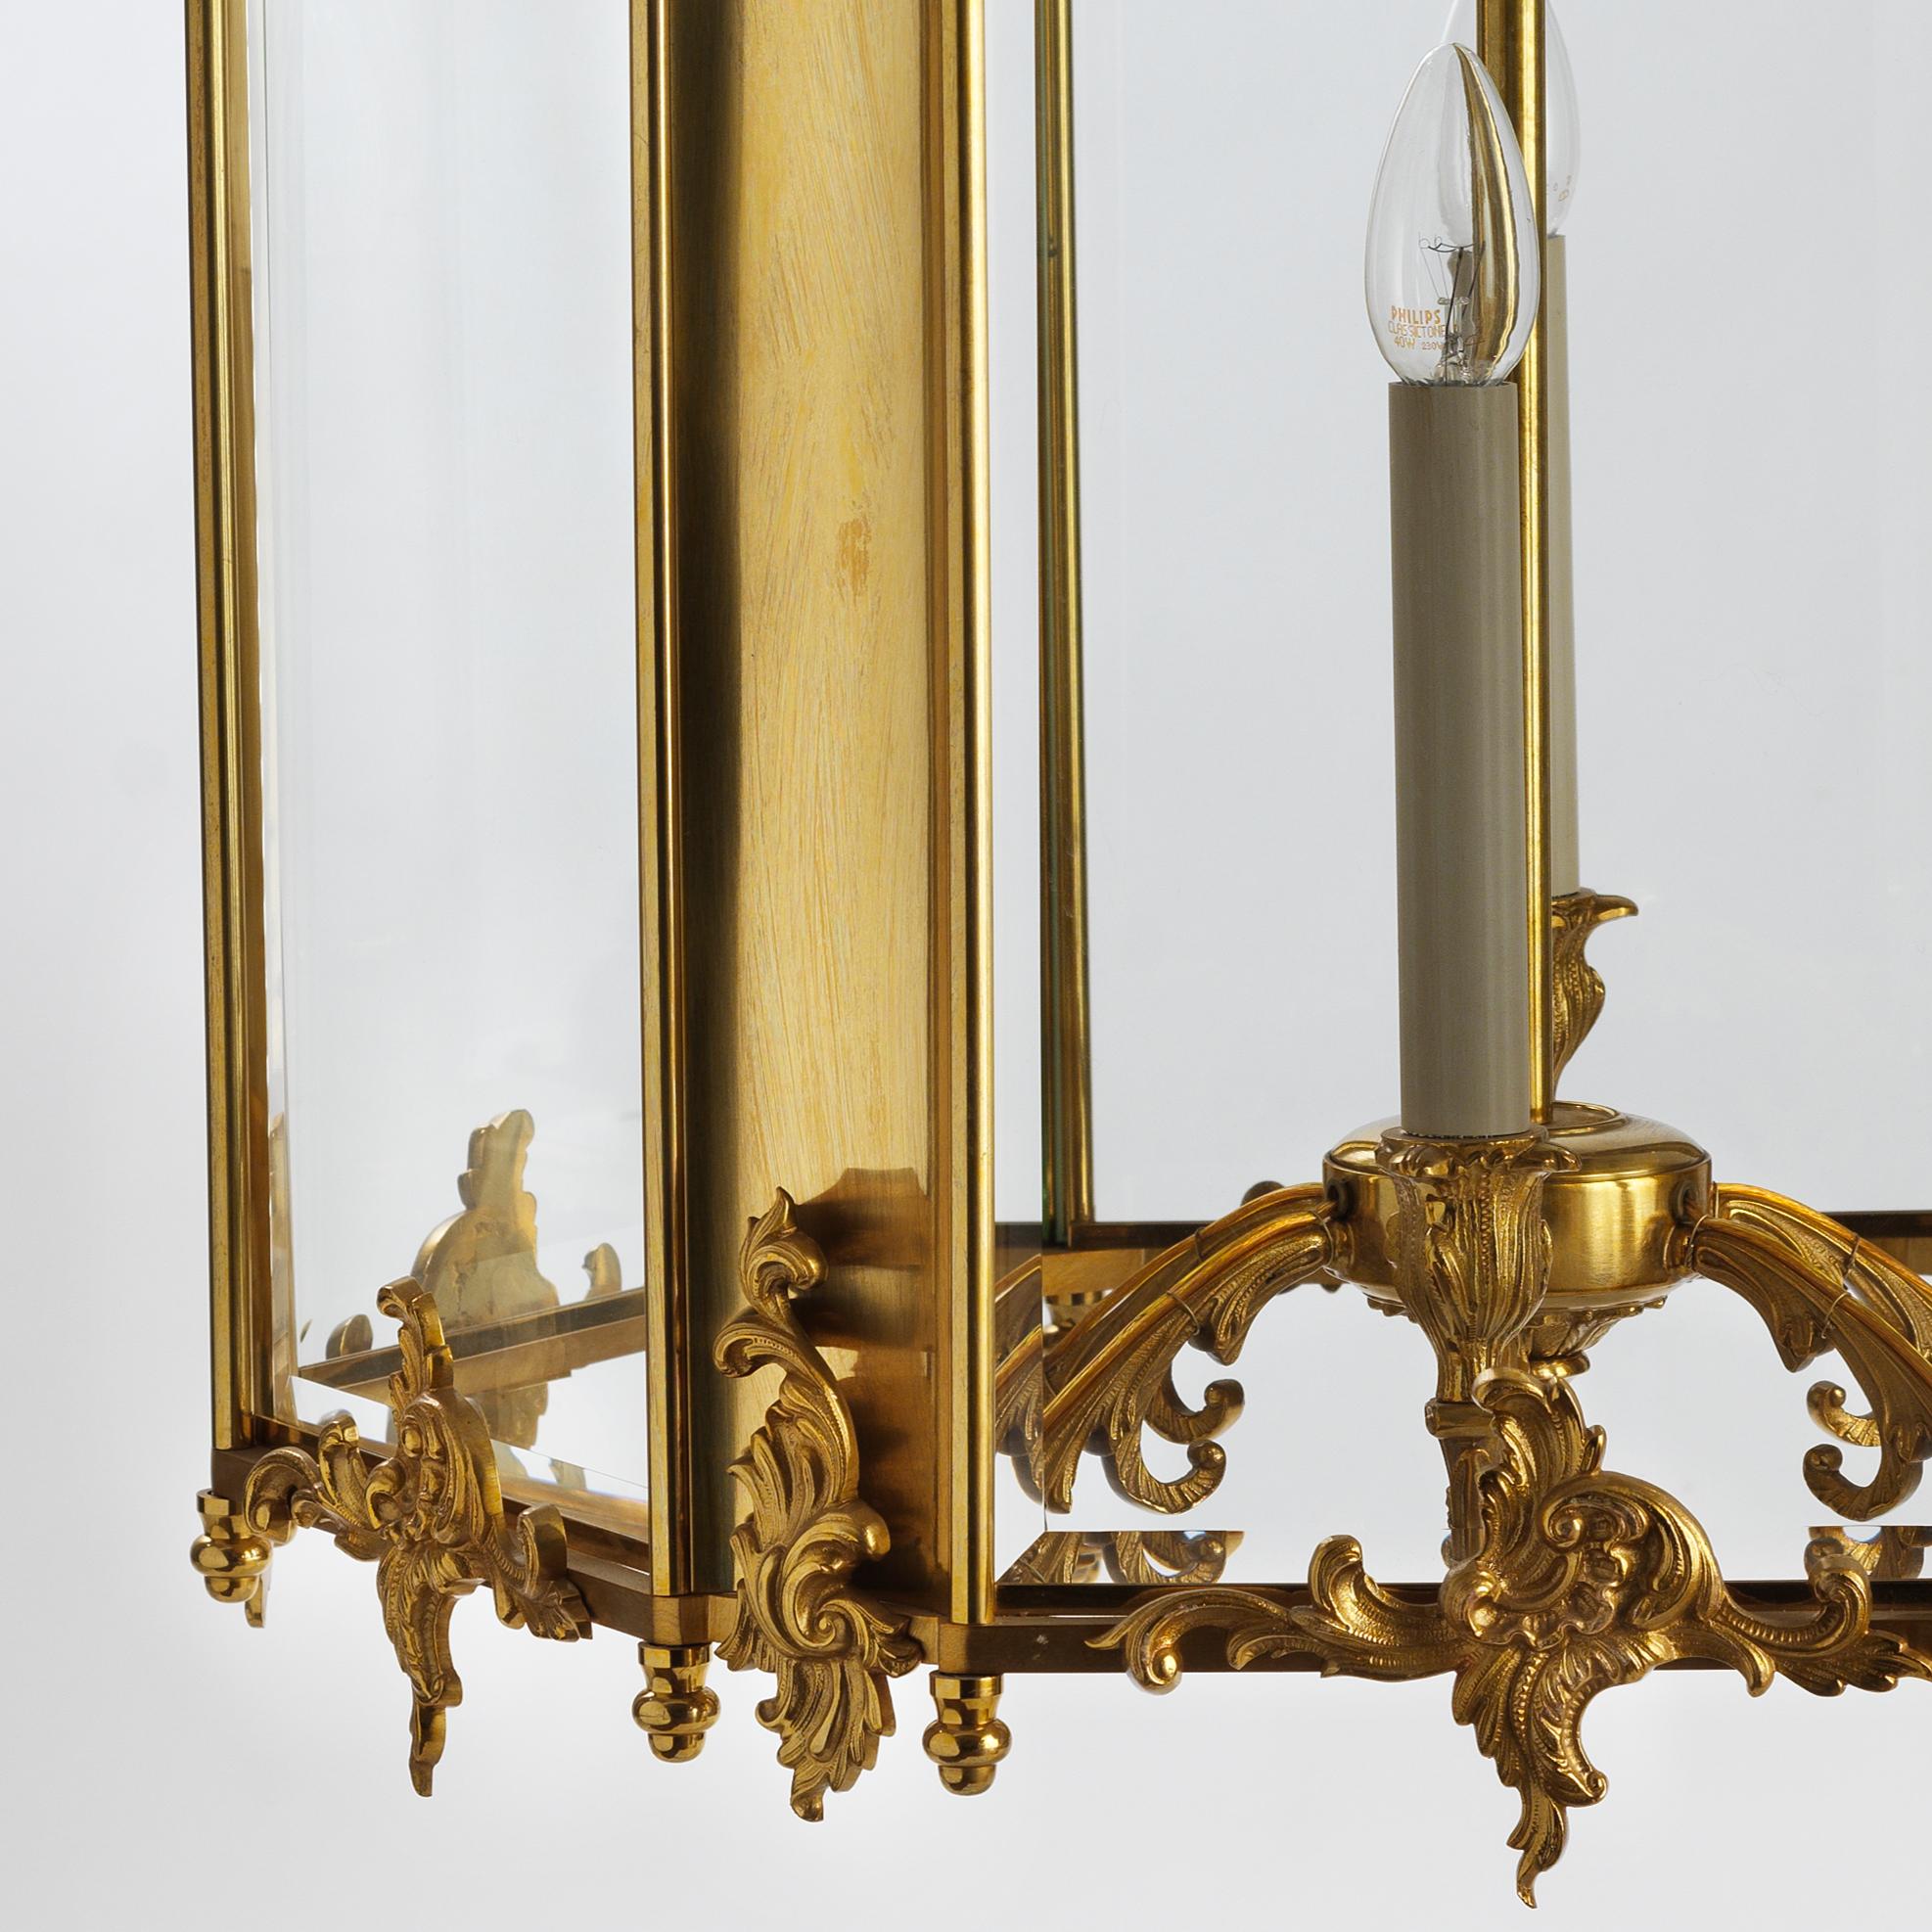 This finely chiseled French Rococo style gilt bronze lantern by Gherardo Degli Albizzi has six-light and it shows classical features of that period such acanthus leaves and vegetal decoration all-over.
Foliate crown stays above the six leafy arms